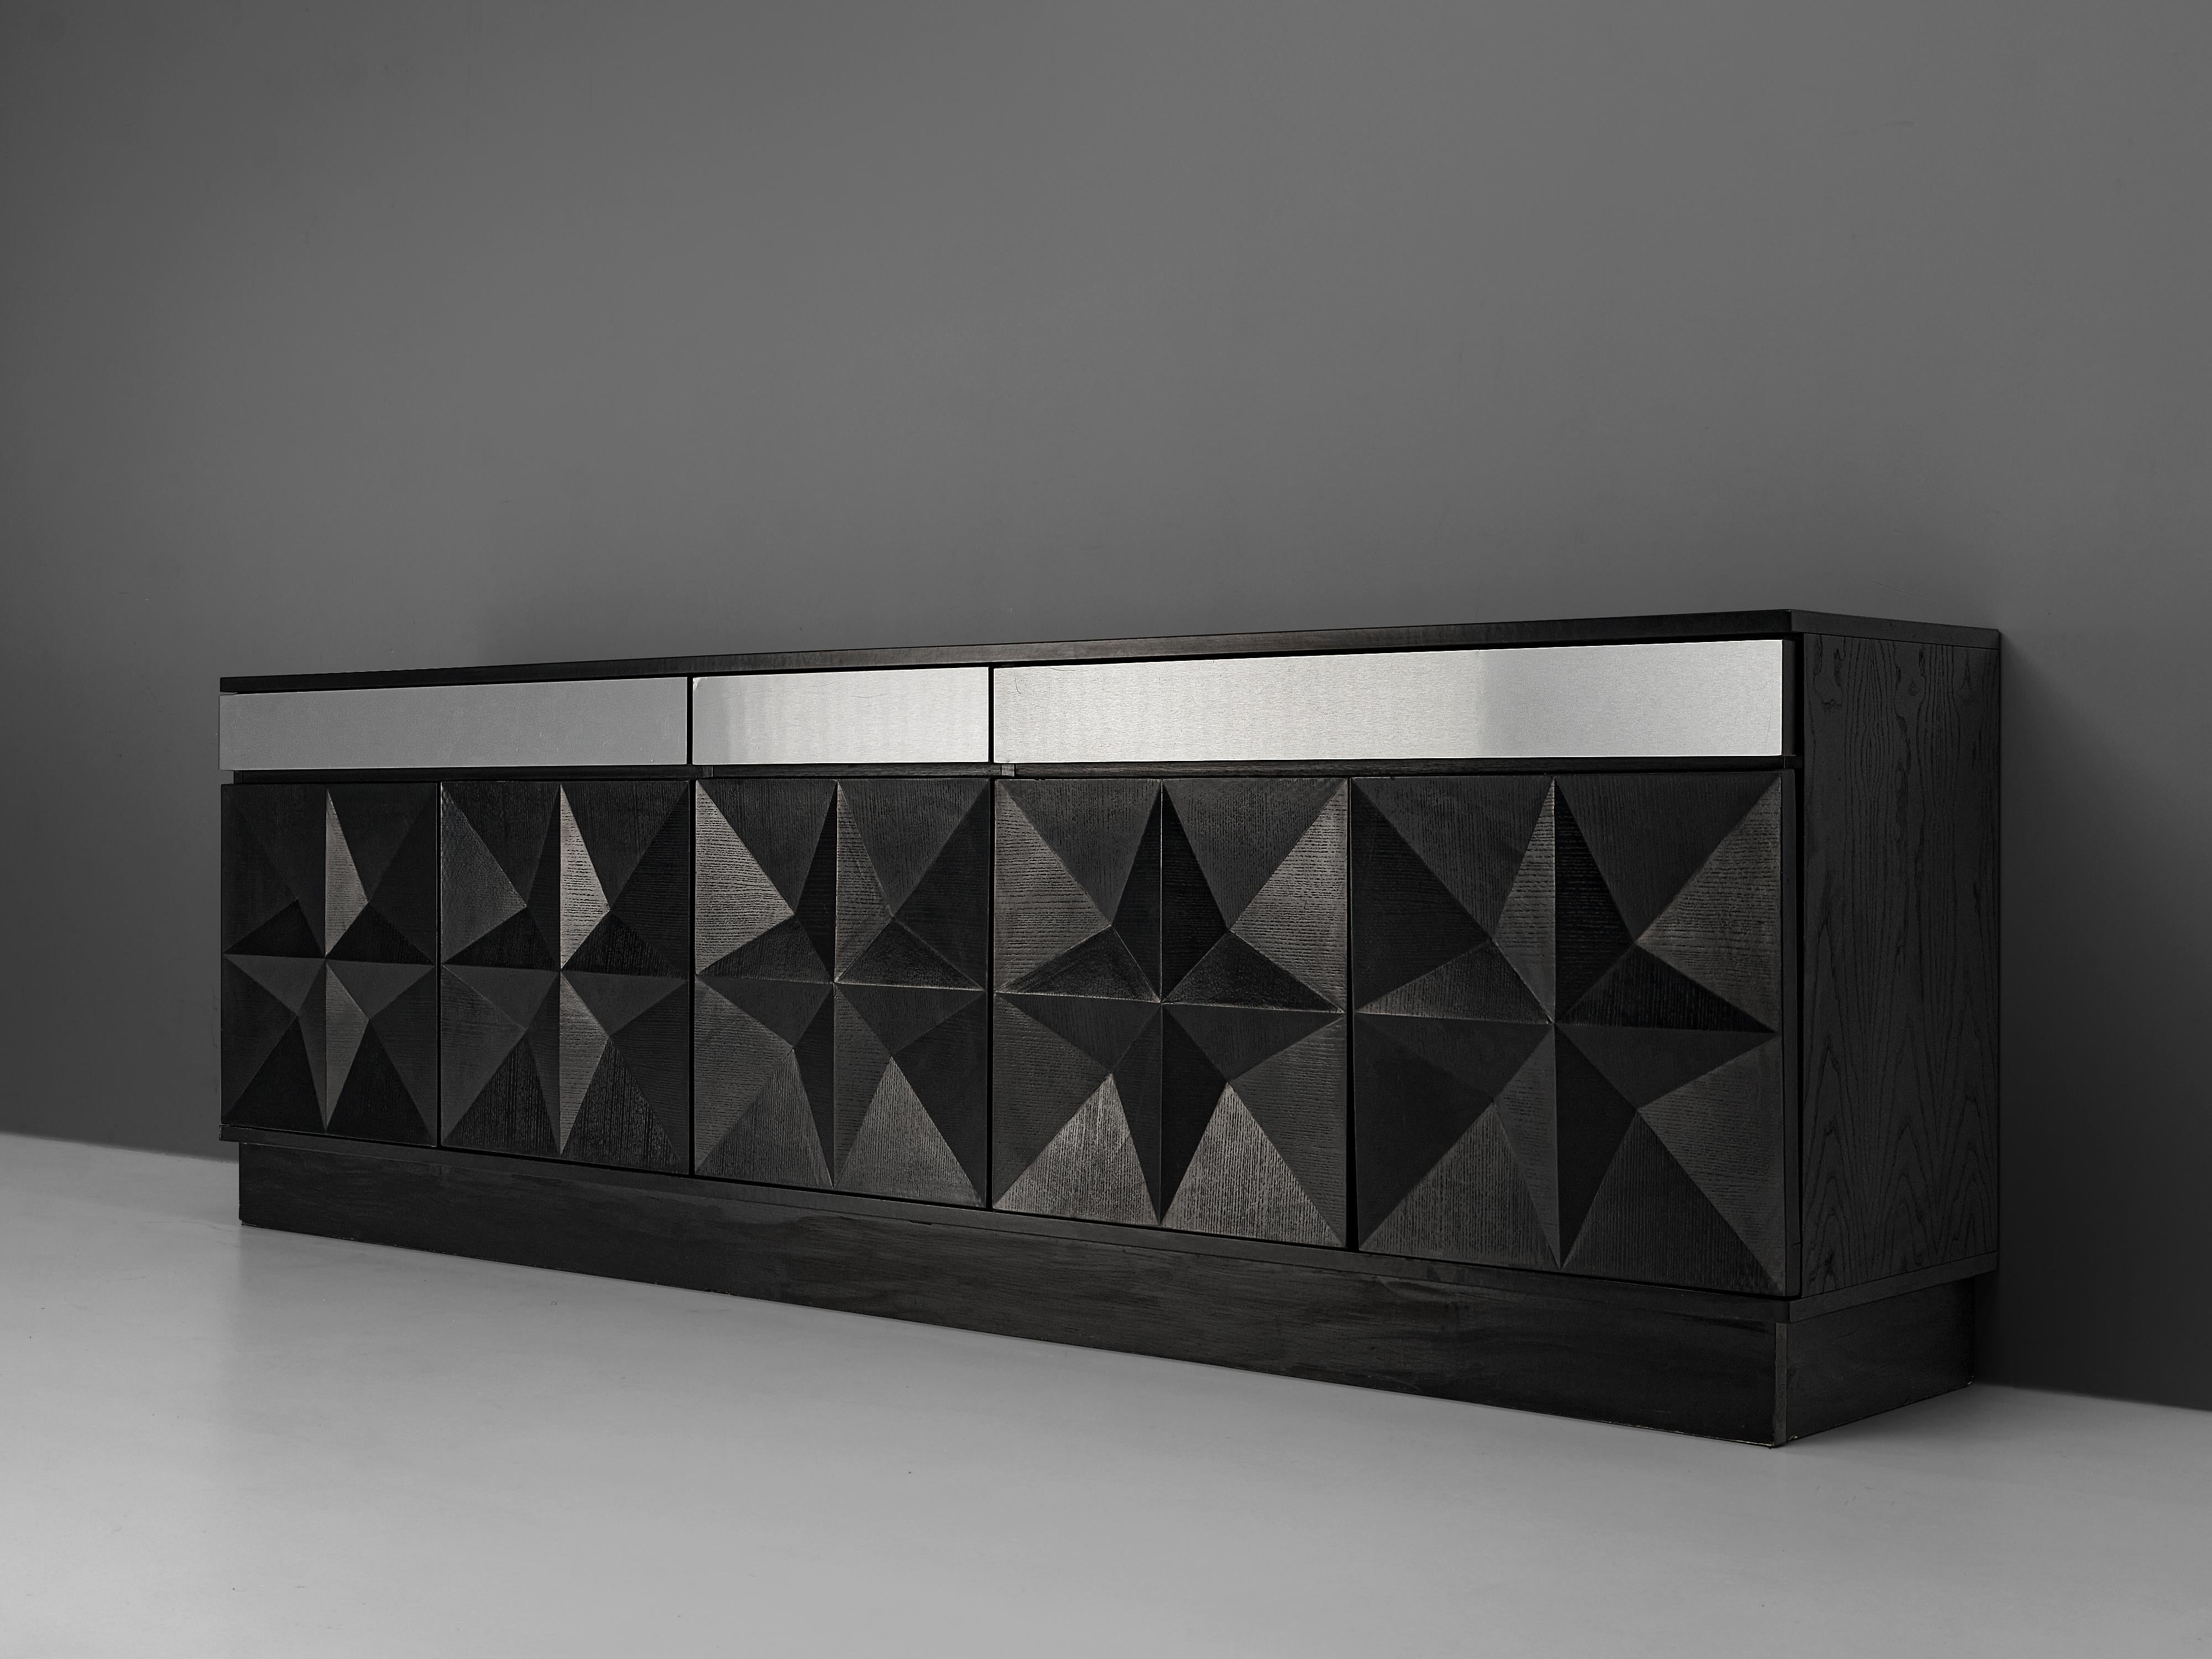 Sideboard, black lacquered oak, metal, Belgium, 1970s

This Belgian sideboard features a wonderfully designed front. The five-doored piece is equipped with three drawers on top. These are highlighted in the way that they feature sleek fronts in